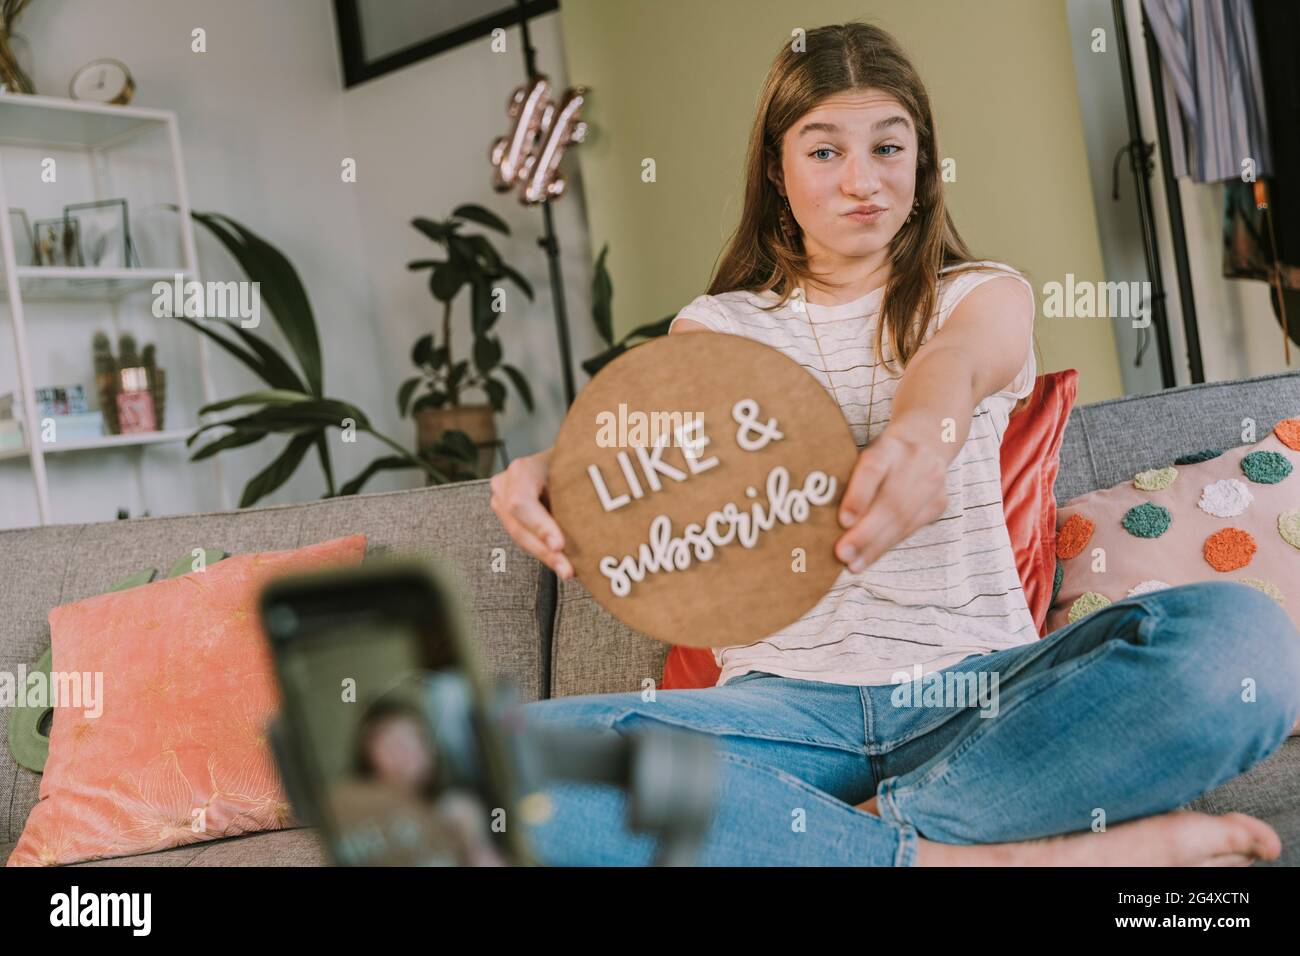 Girl holding like and subscribe sign while filming at home Stock Photo